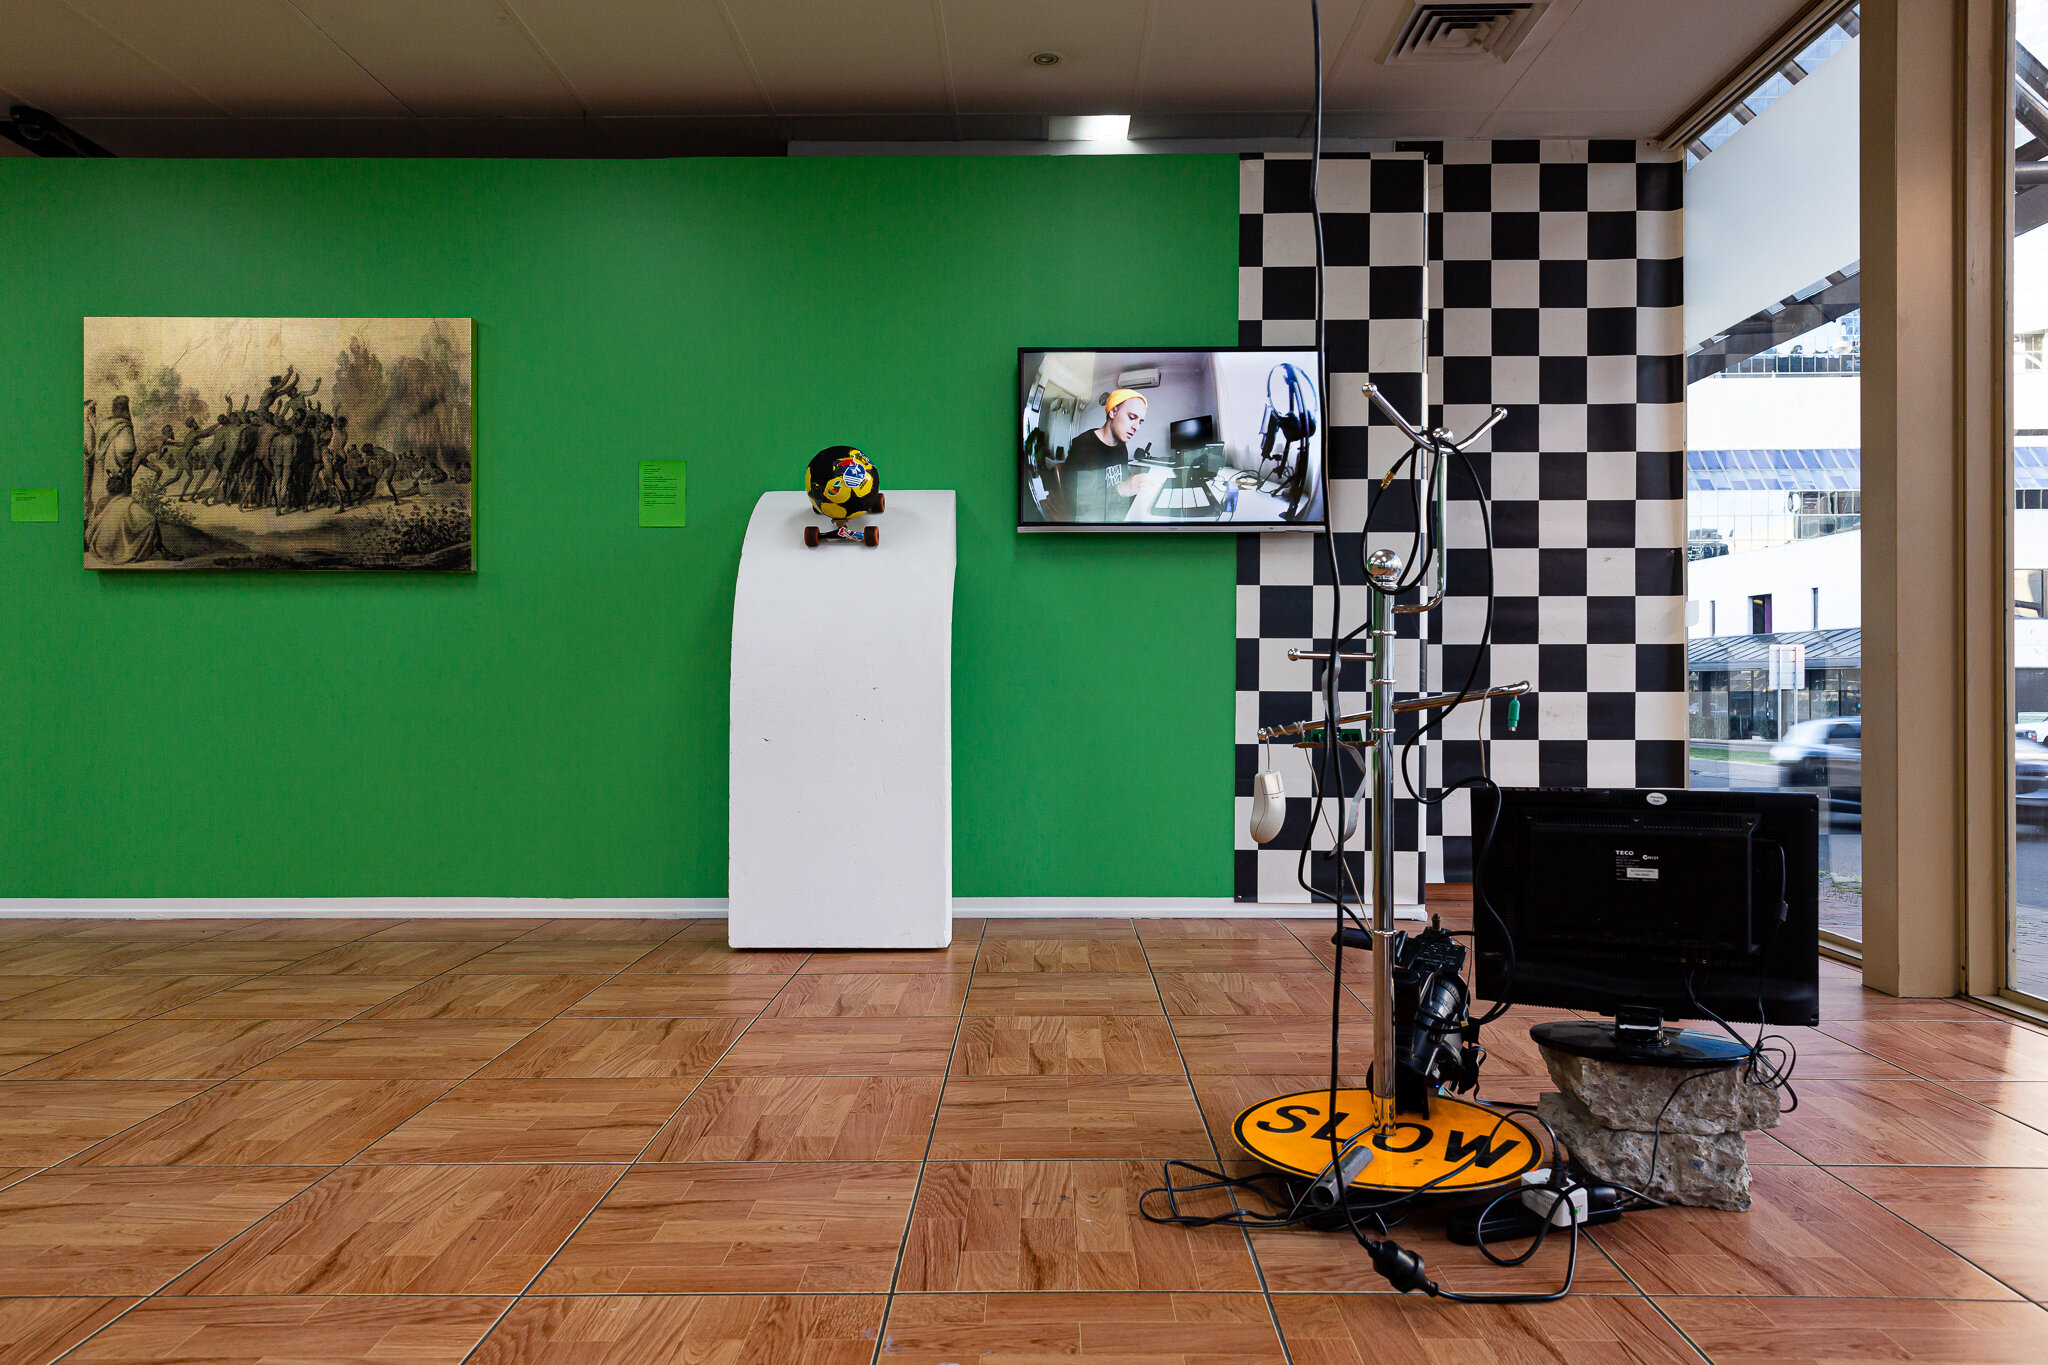   Sports Show,  2020, installation view, left to right: Brook Andrew,  Australia I Black Gold,  2012, Feras Shaheen,  Cross Cultures  series, 2020. 